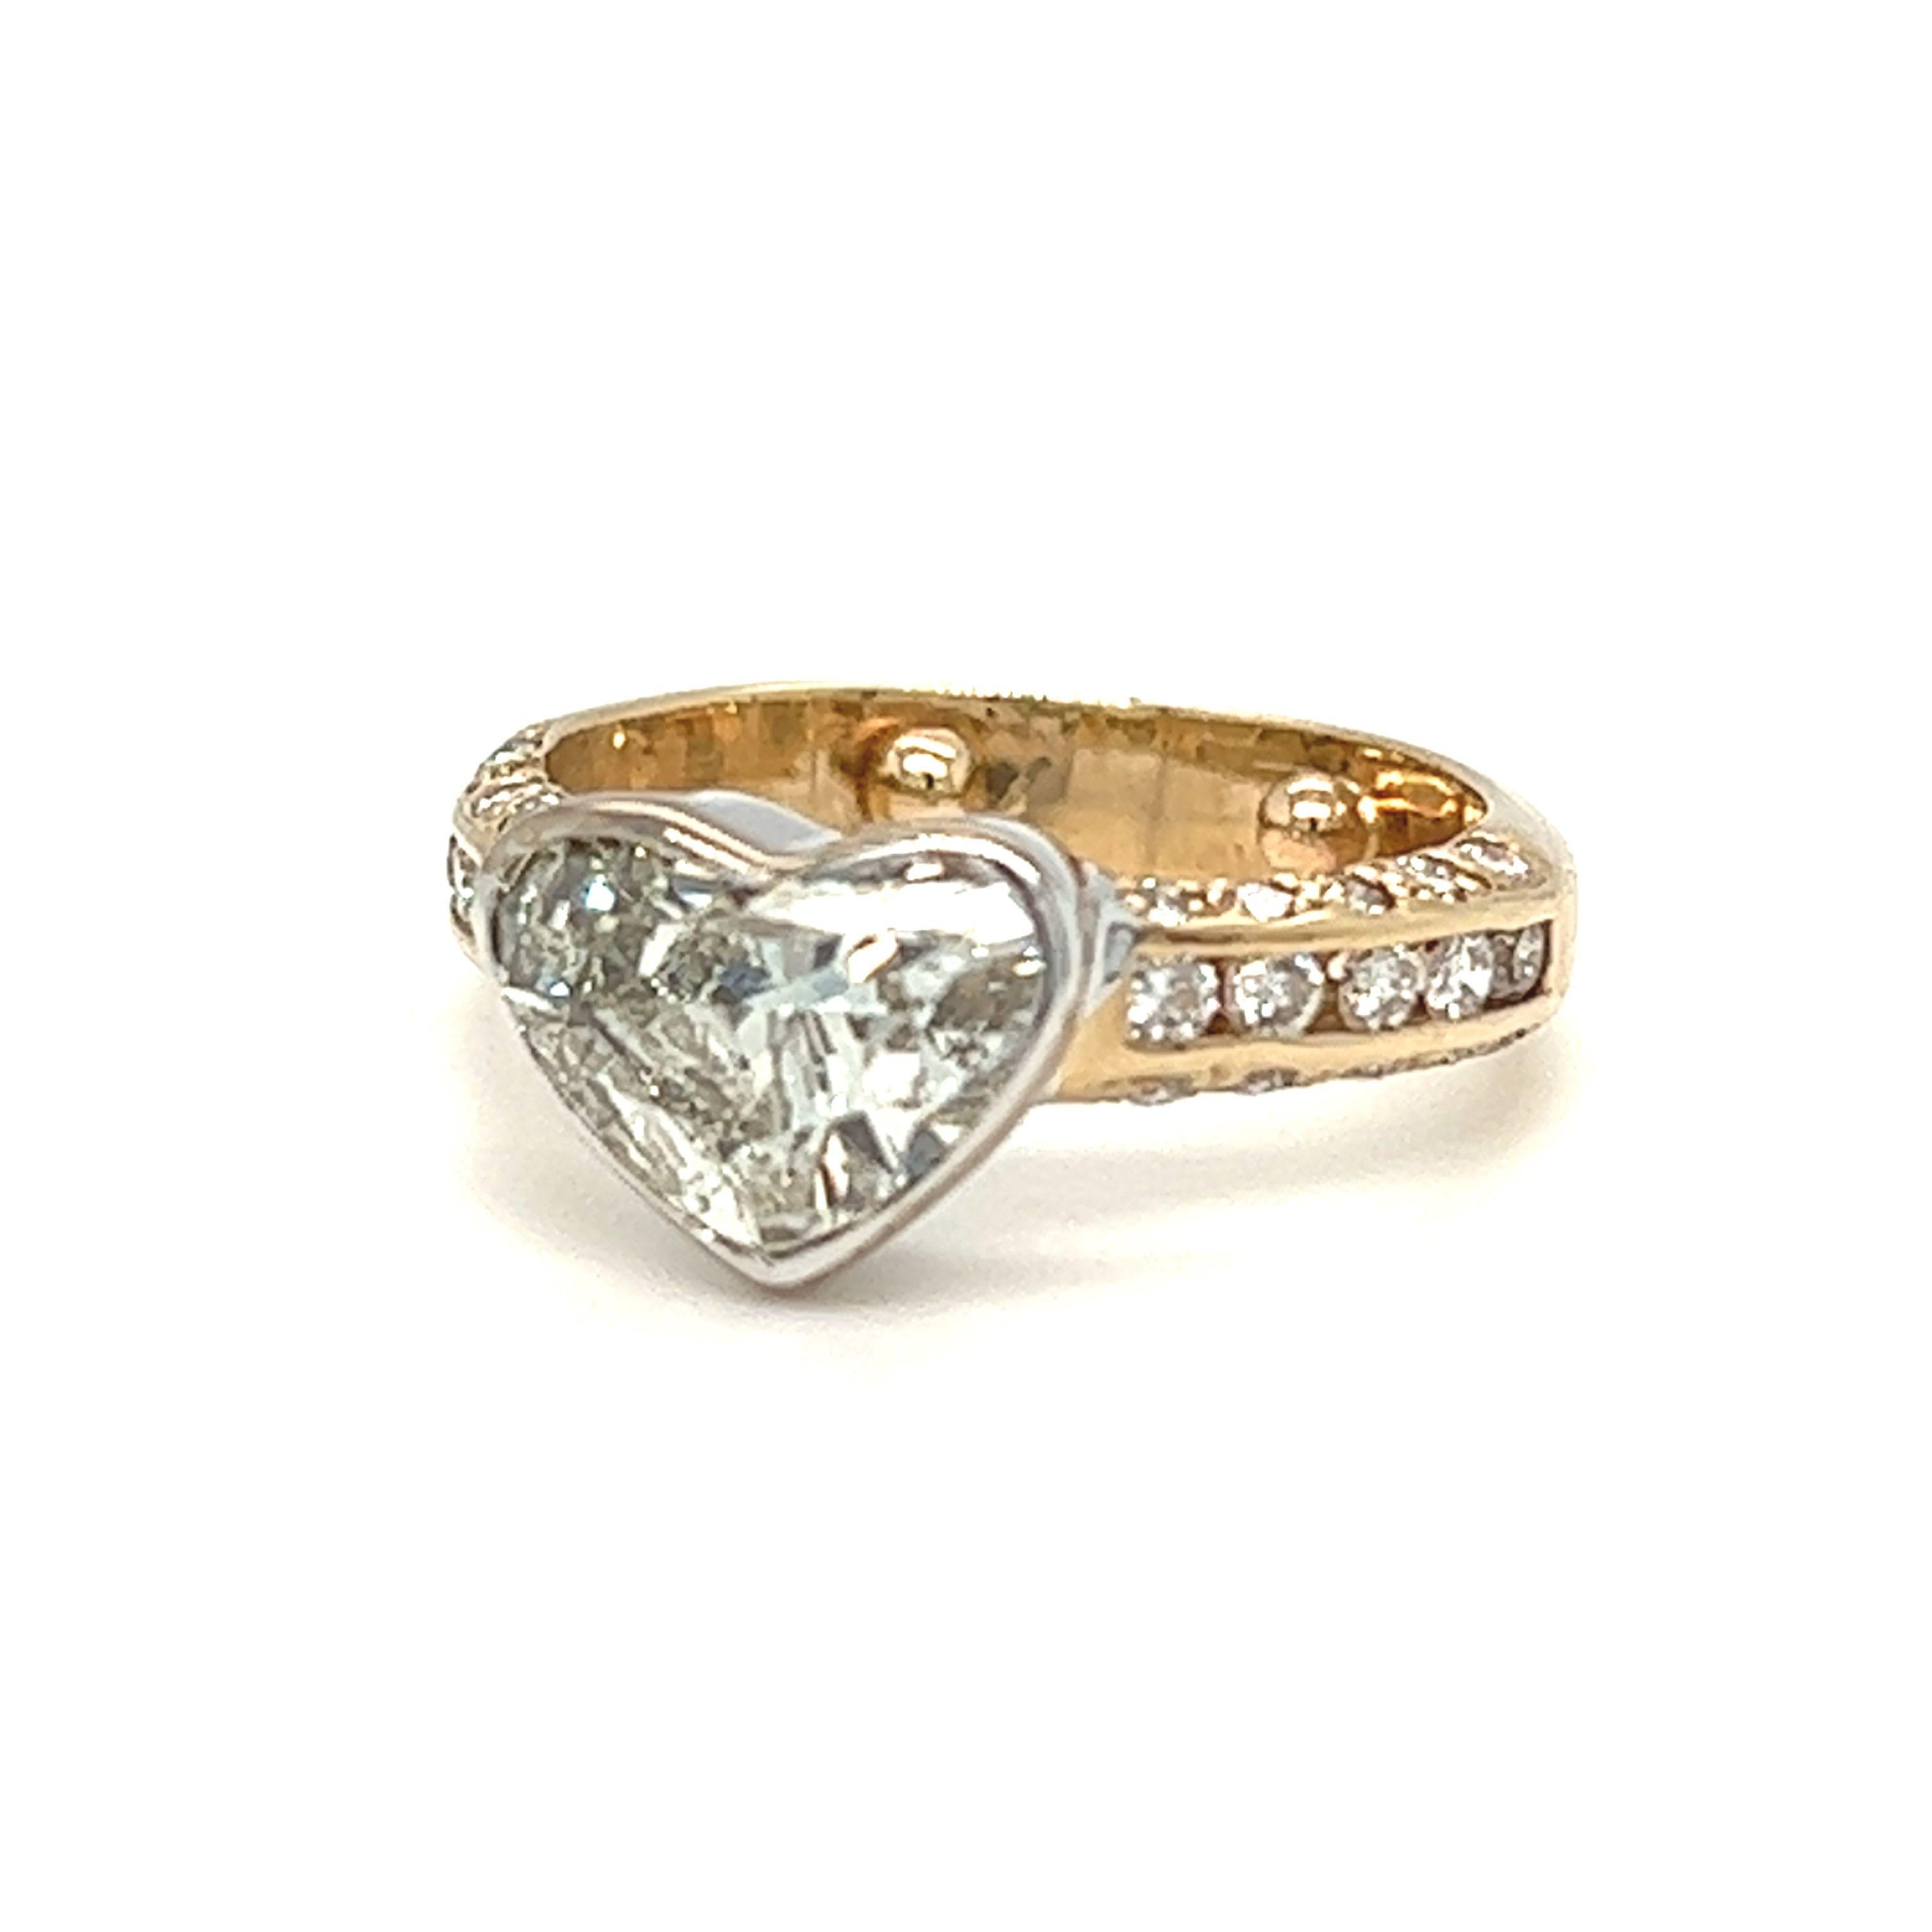 From our estate jewelry collection is this elegant yet playful ring features a grayish heart shaped diamond weighing approximately 2 carats resting within a sleek bezel frame. Accenting this heart shaped diamond center stone is an ensemble of